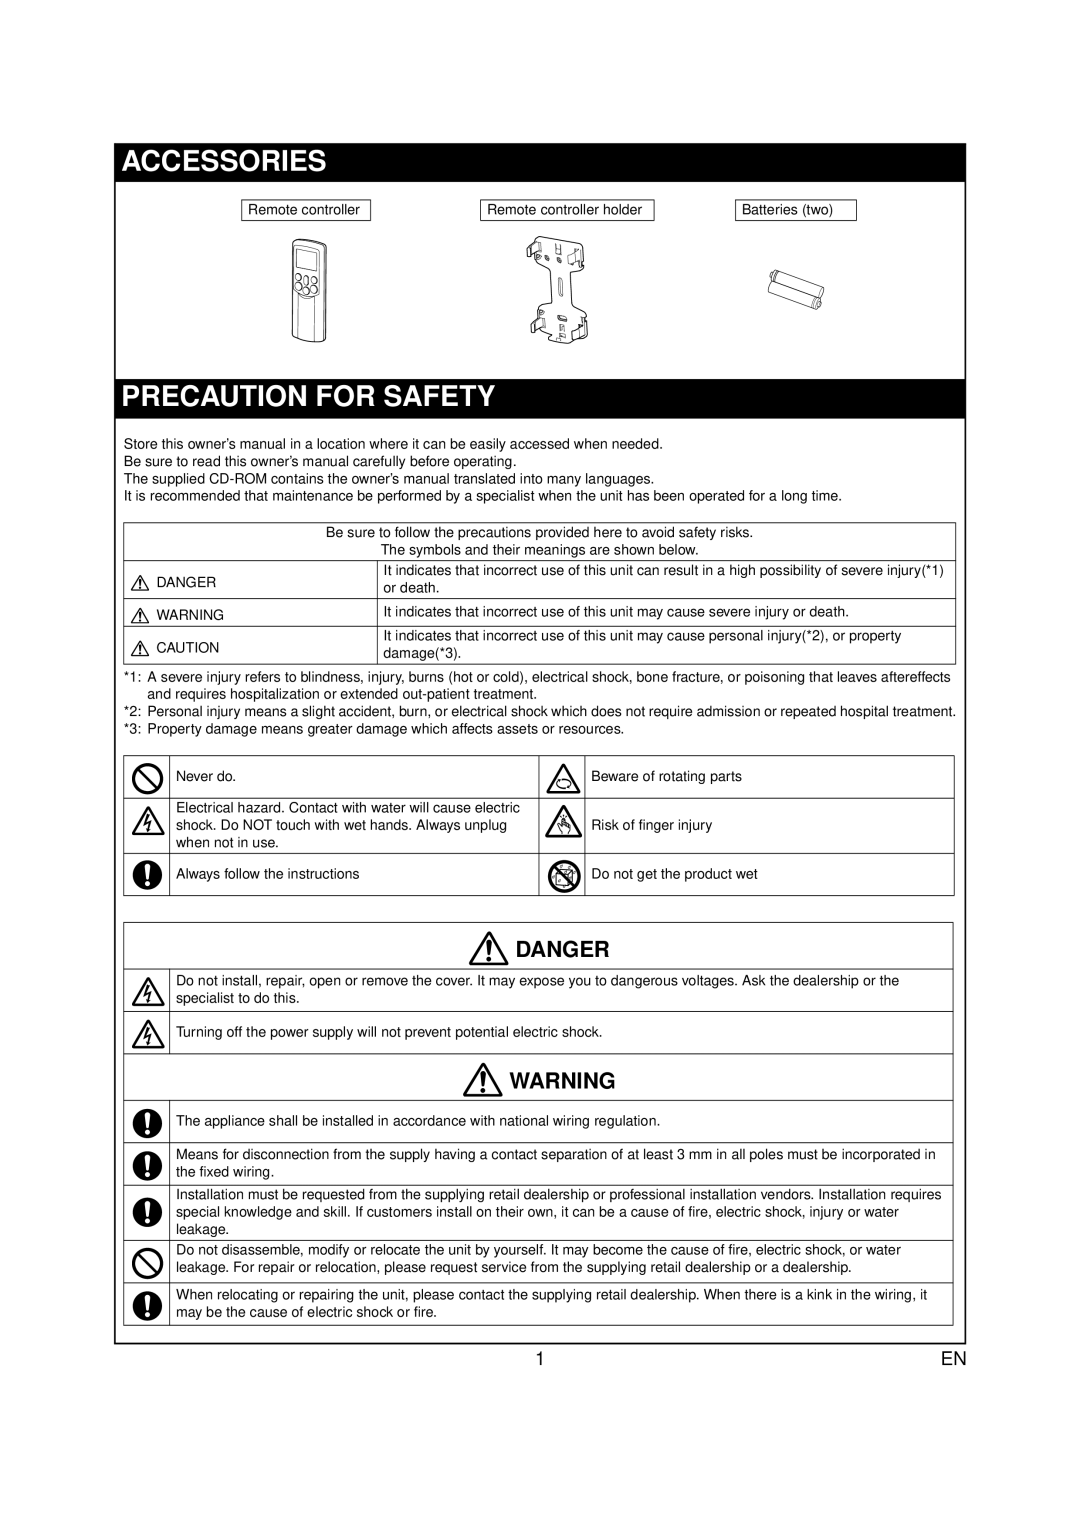 Toshiba RAS-07PKVP-E owner manual Accessories, Precaution For Safety, Danger 